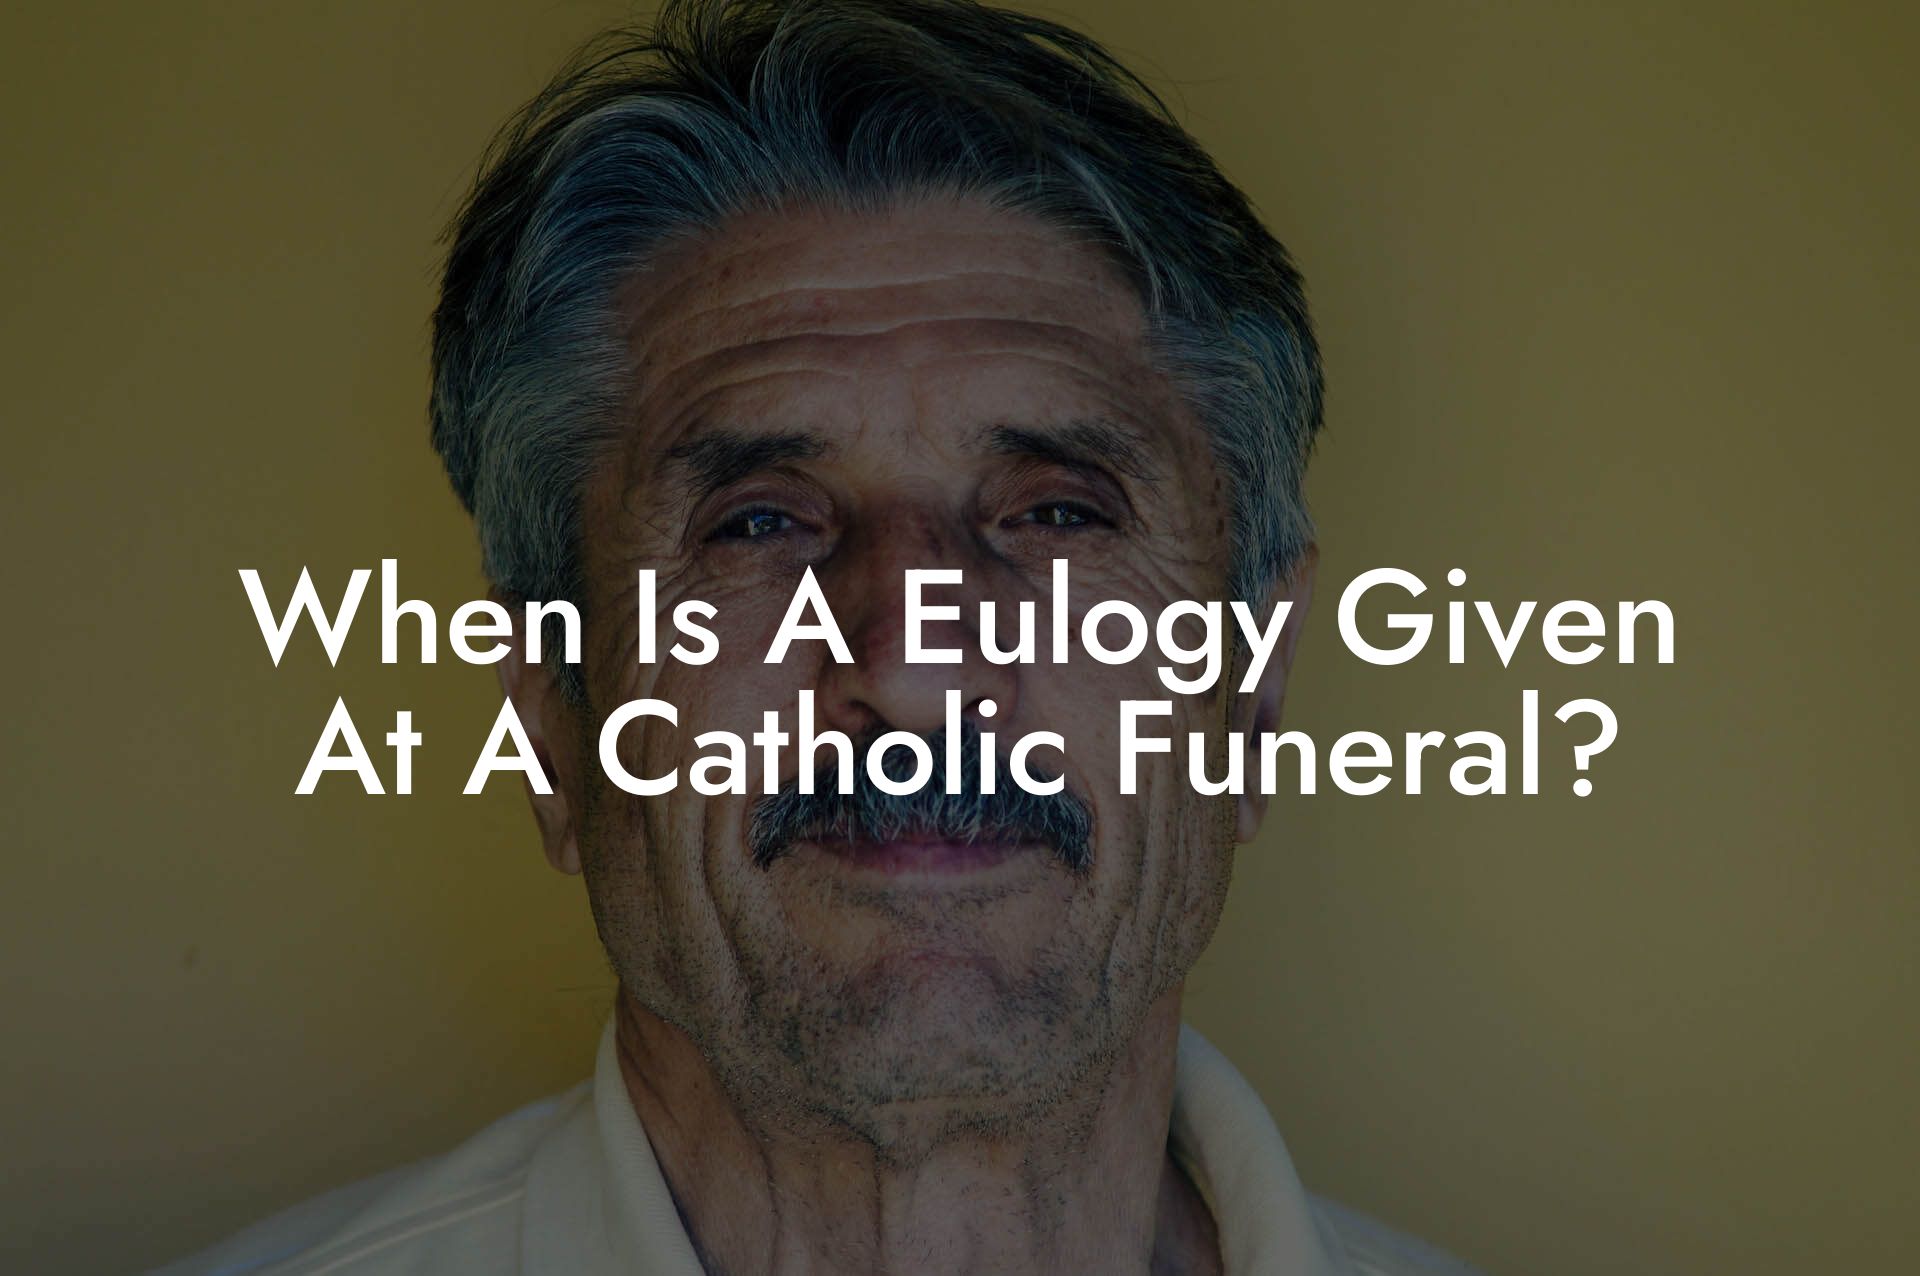 When Is A Eulogy Given At A Catholic Funeral?